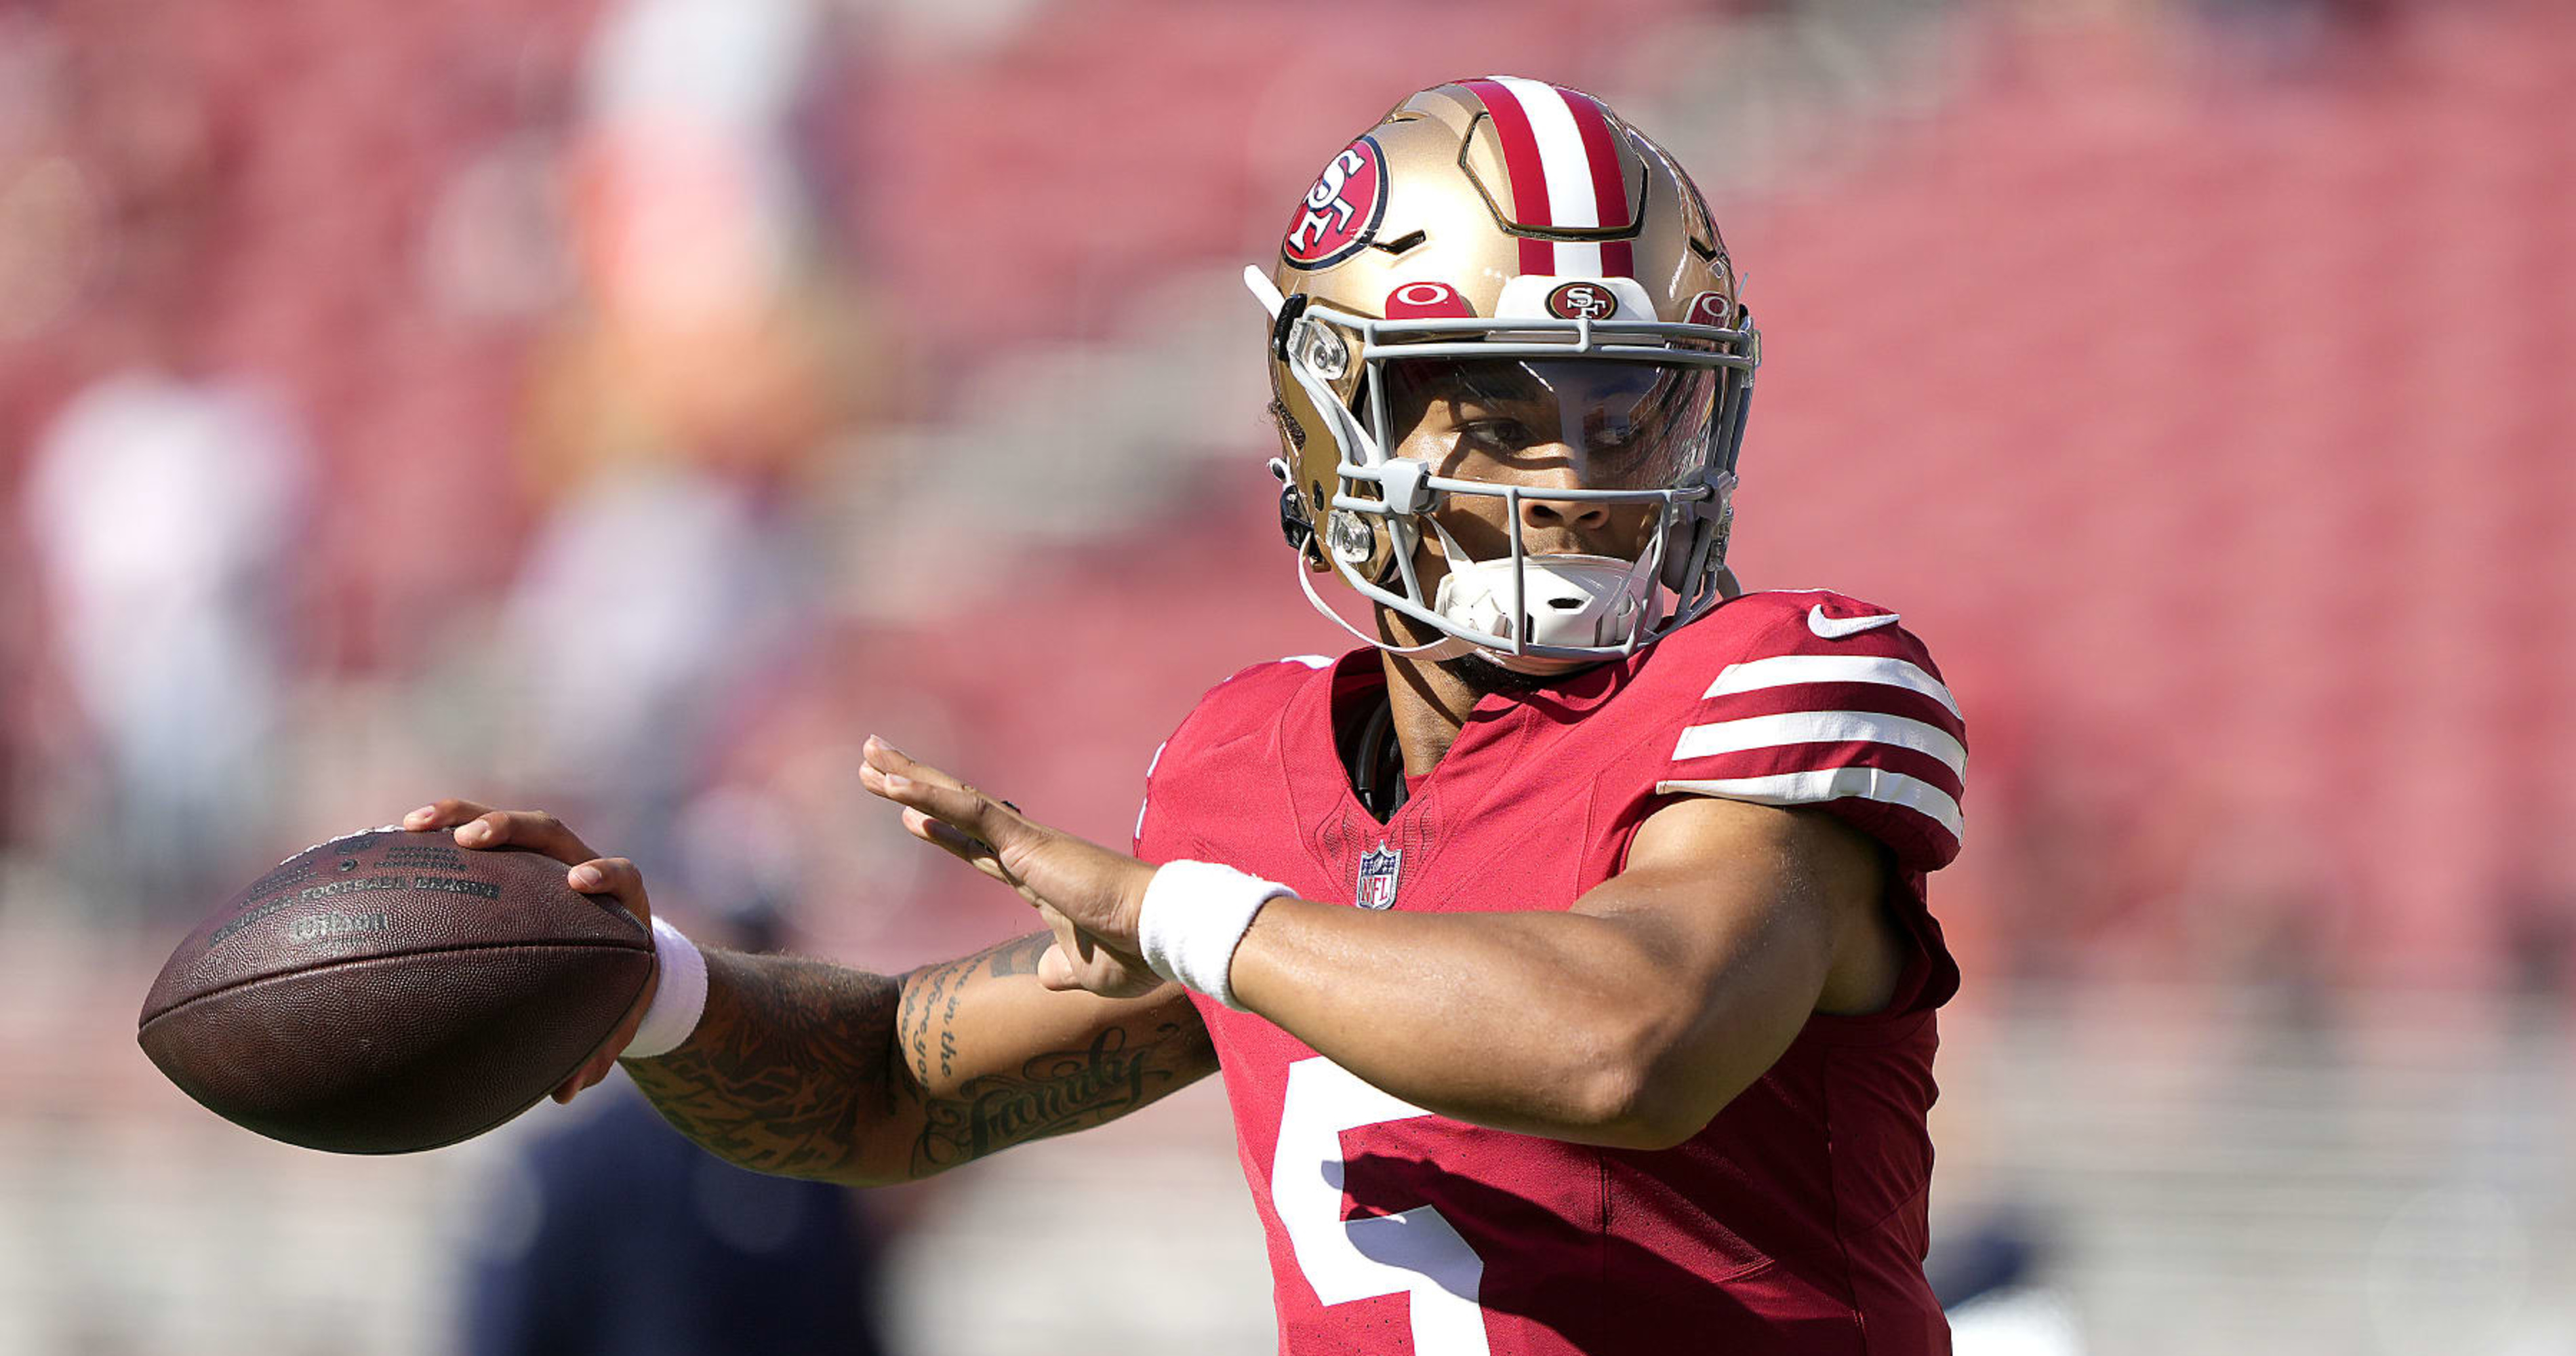 49ers, Lance hope to rebound; Seahawks, Smith look to build